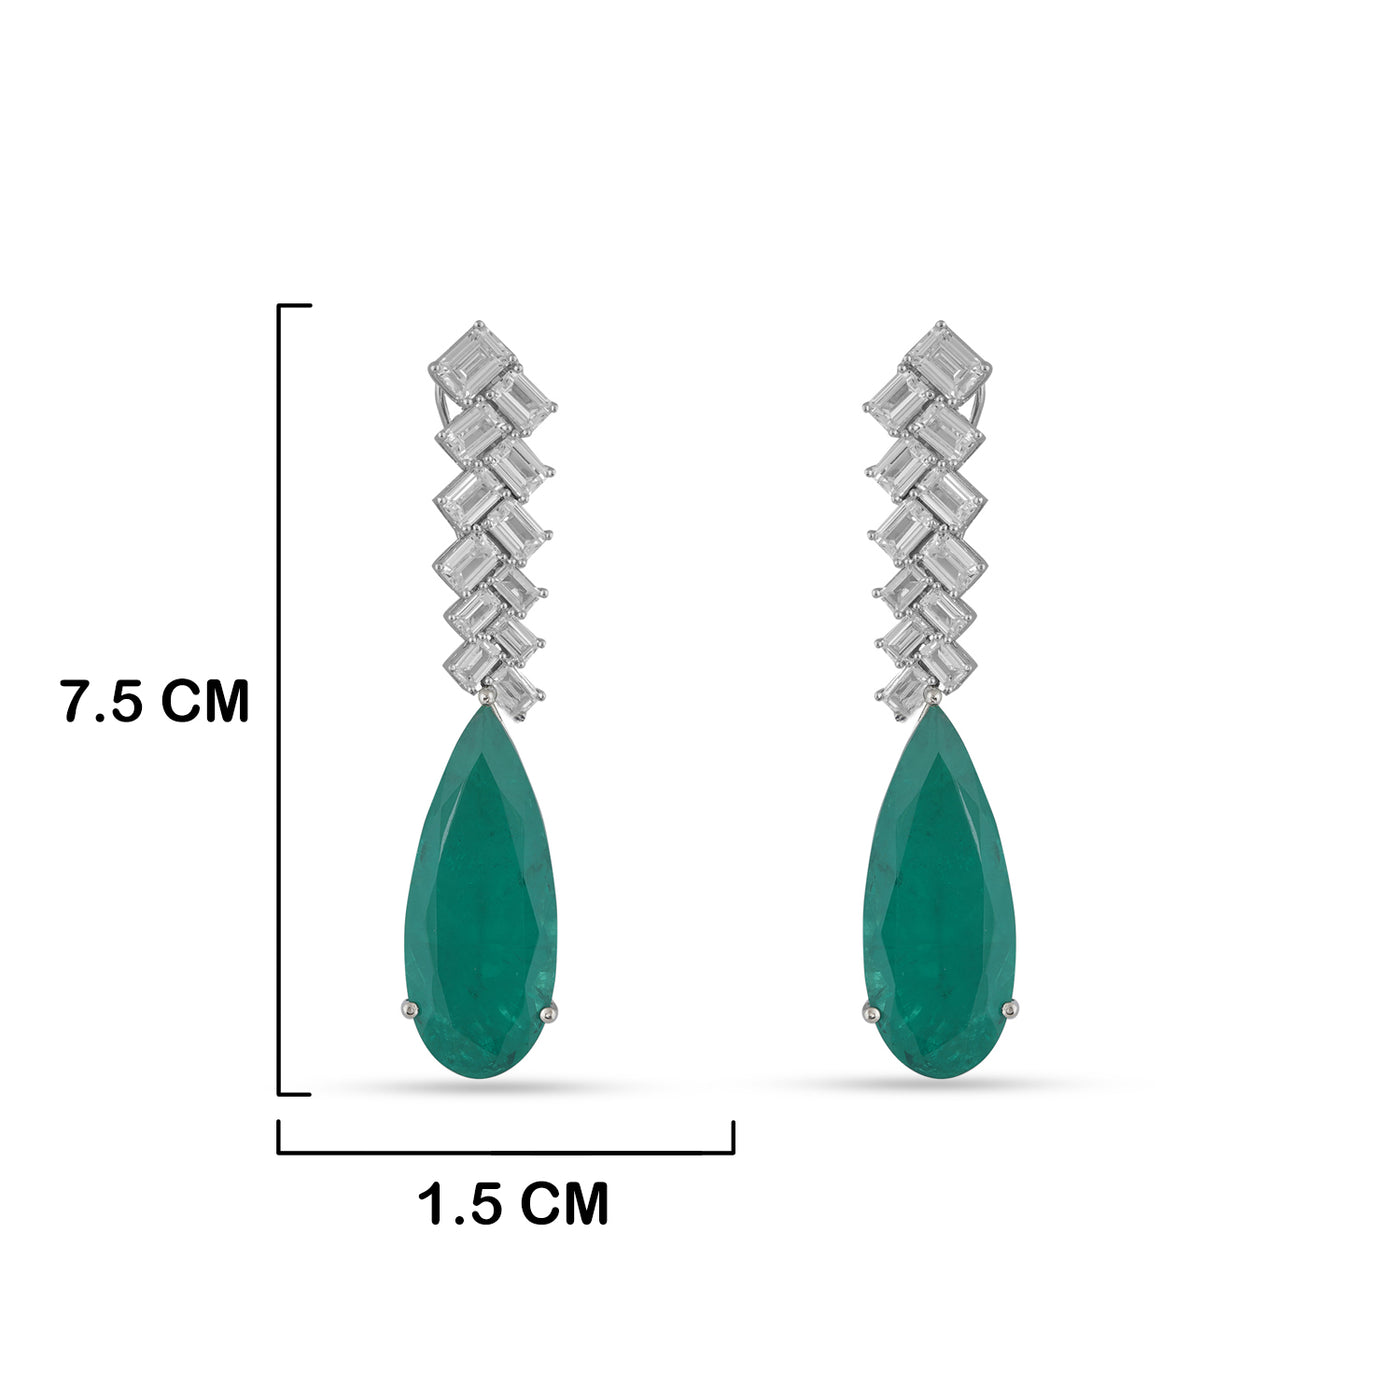 CZ and Green Drop Earrings with measurements in cm. 7.5cm by 1.5cm.